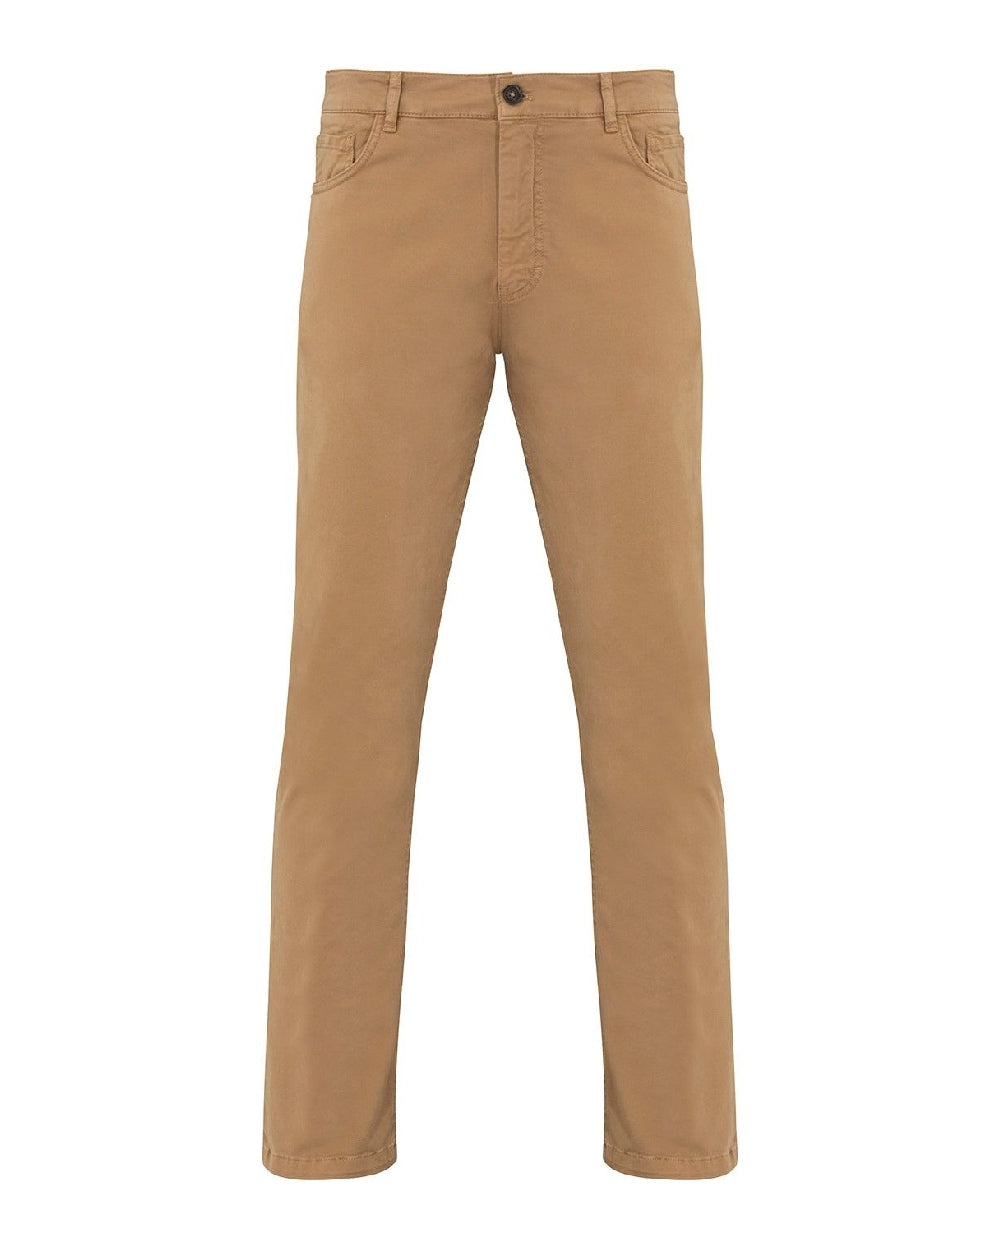 Alan Paine Mens Cheltham Chino Jeans in Sand 